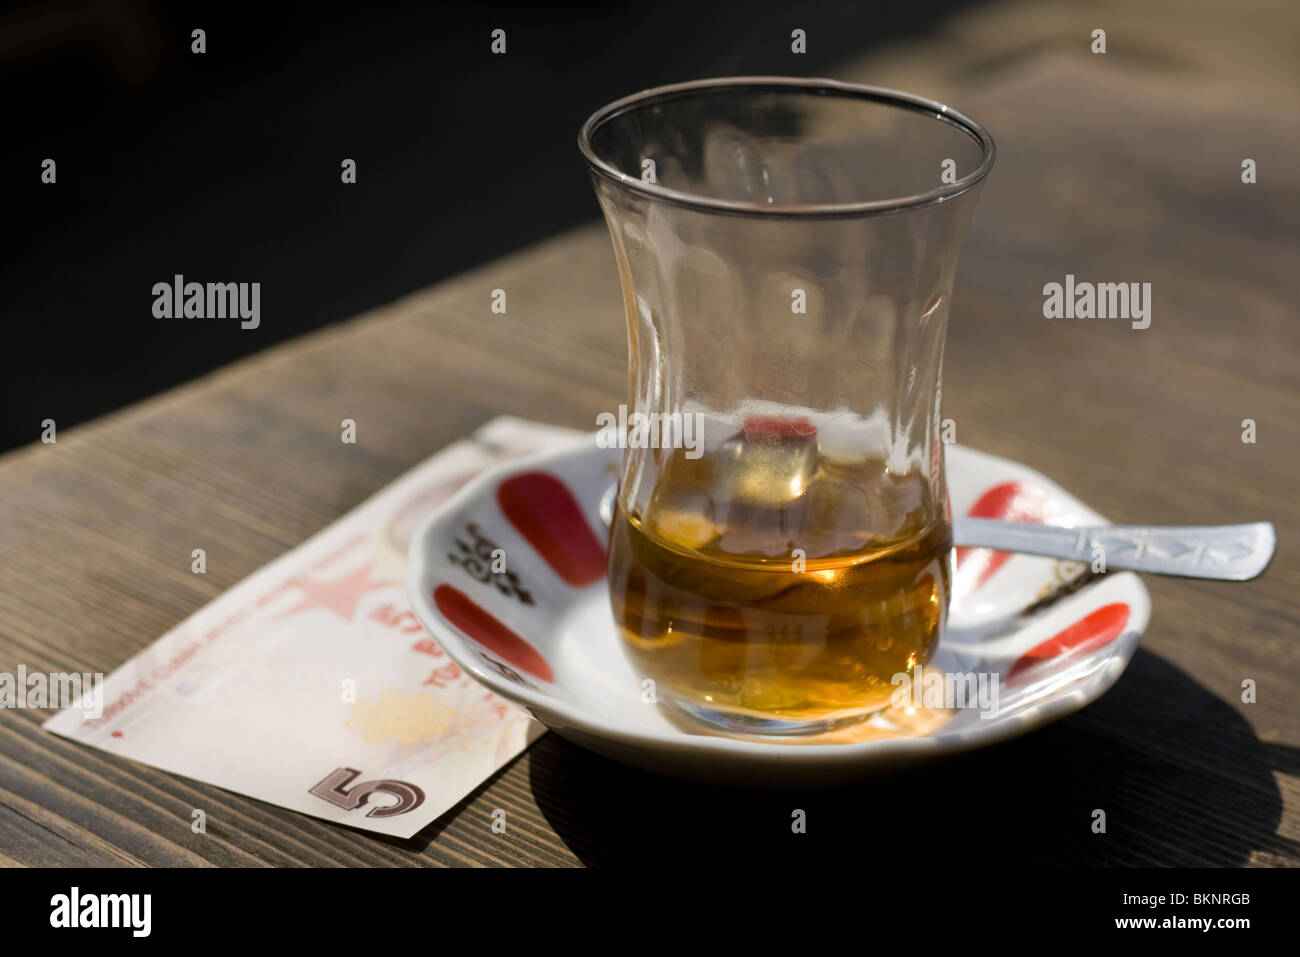 Almost empty glass of apple tea with 5 Turkish-Lire note left as payment. Stock Photo